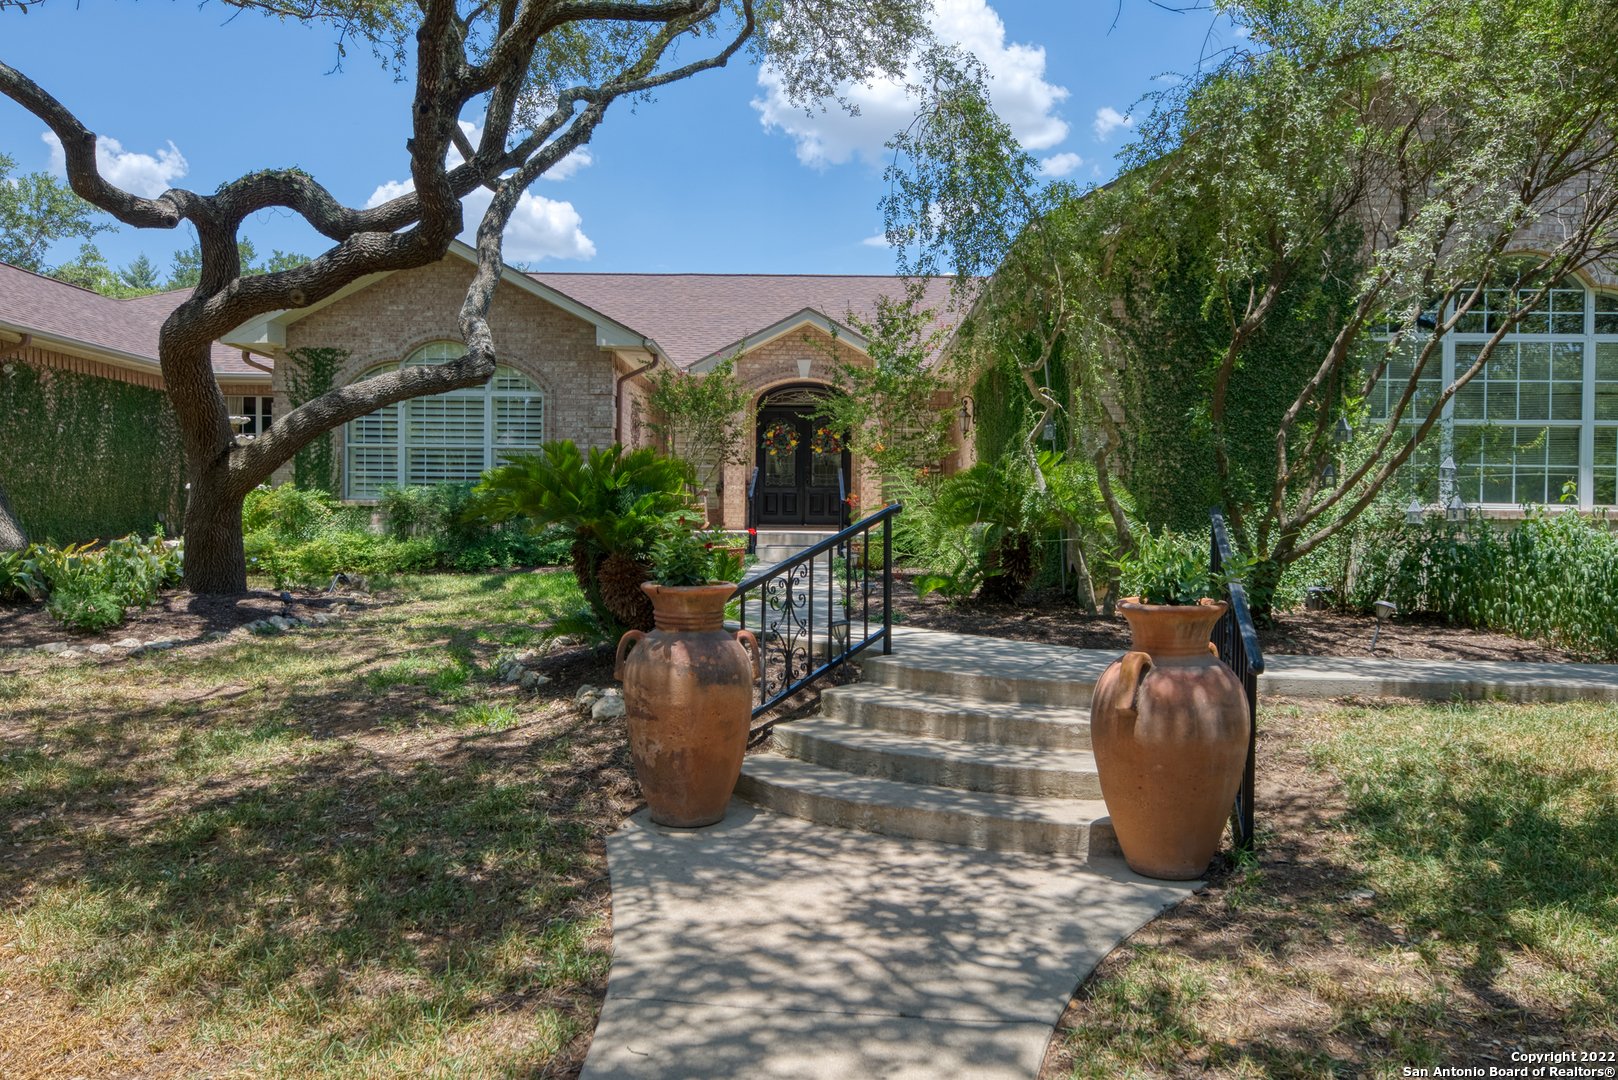 Fabulous one-story home on one acre in town! Highly sought-after neighborhood, close to HEB, easy access to IH-35. This lovely 4-bedrooms, 3 bathrooms with 3 car garage home is great for entertaining. Come see this backyard with gorgeous pool/hot tub and plenty of covered space to relax and enjoy life! All the bedrooms are good sized with huge closets, master bedroom has 2 walk-in closets, spa like bathroom, 2 large living areas, plus 2 big dining areas, gourmet kitchen, office/utility area by garage. If you like to entertain this is a must for you!